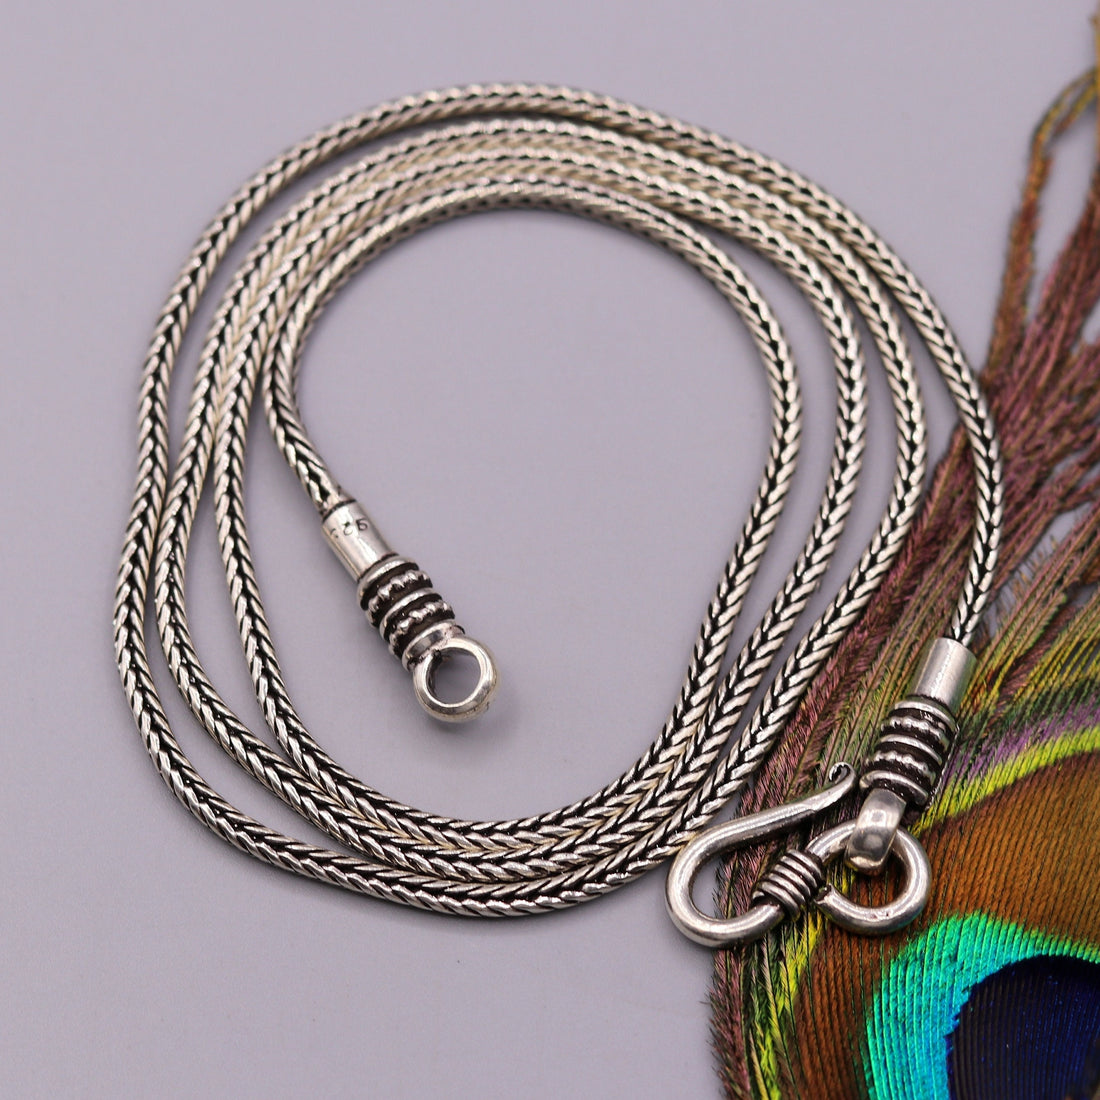 925 Sterling silver handmade solid wheat chain with screw, 20 inches long 2 mm screw chain, pendant chain necklace india jewelry ch32 - TRIBAL ORNAMENTS